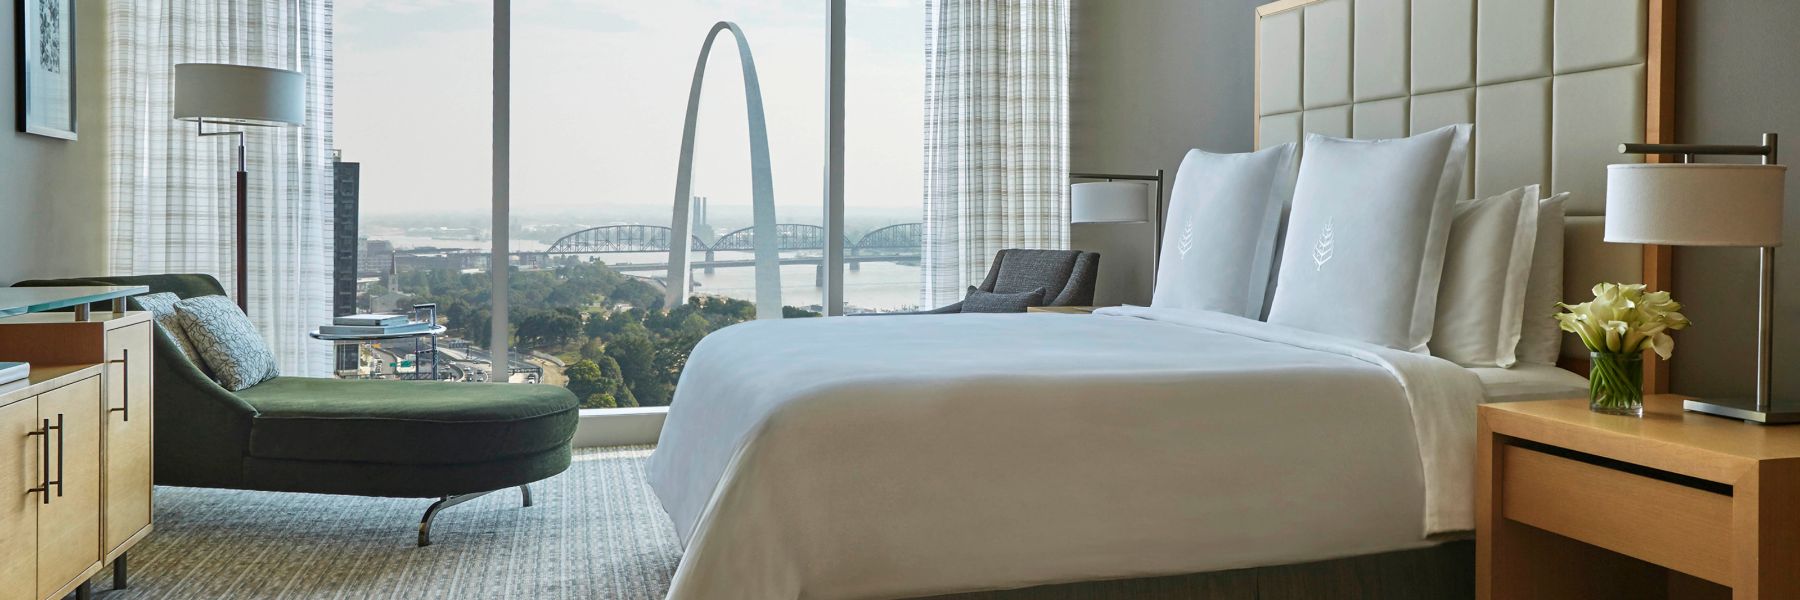 Stay at the Four Seasons Hotel St. Louis for magnificent views of the Gateway Arch.